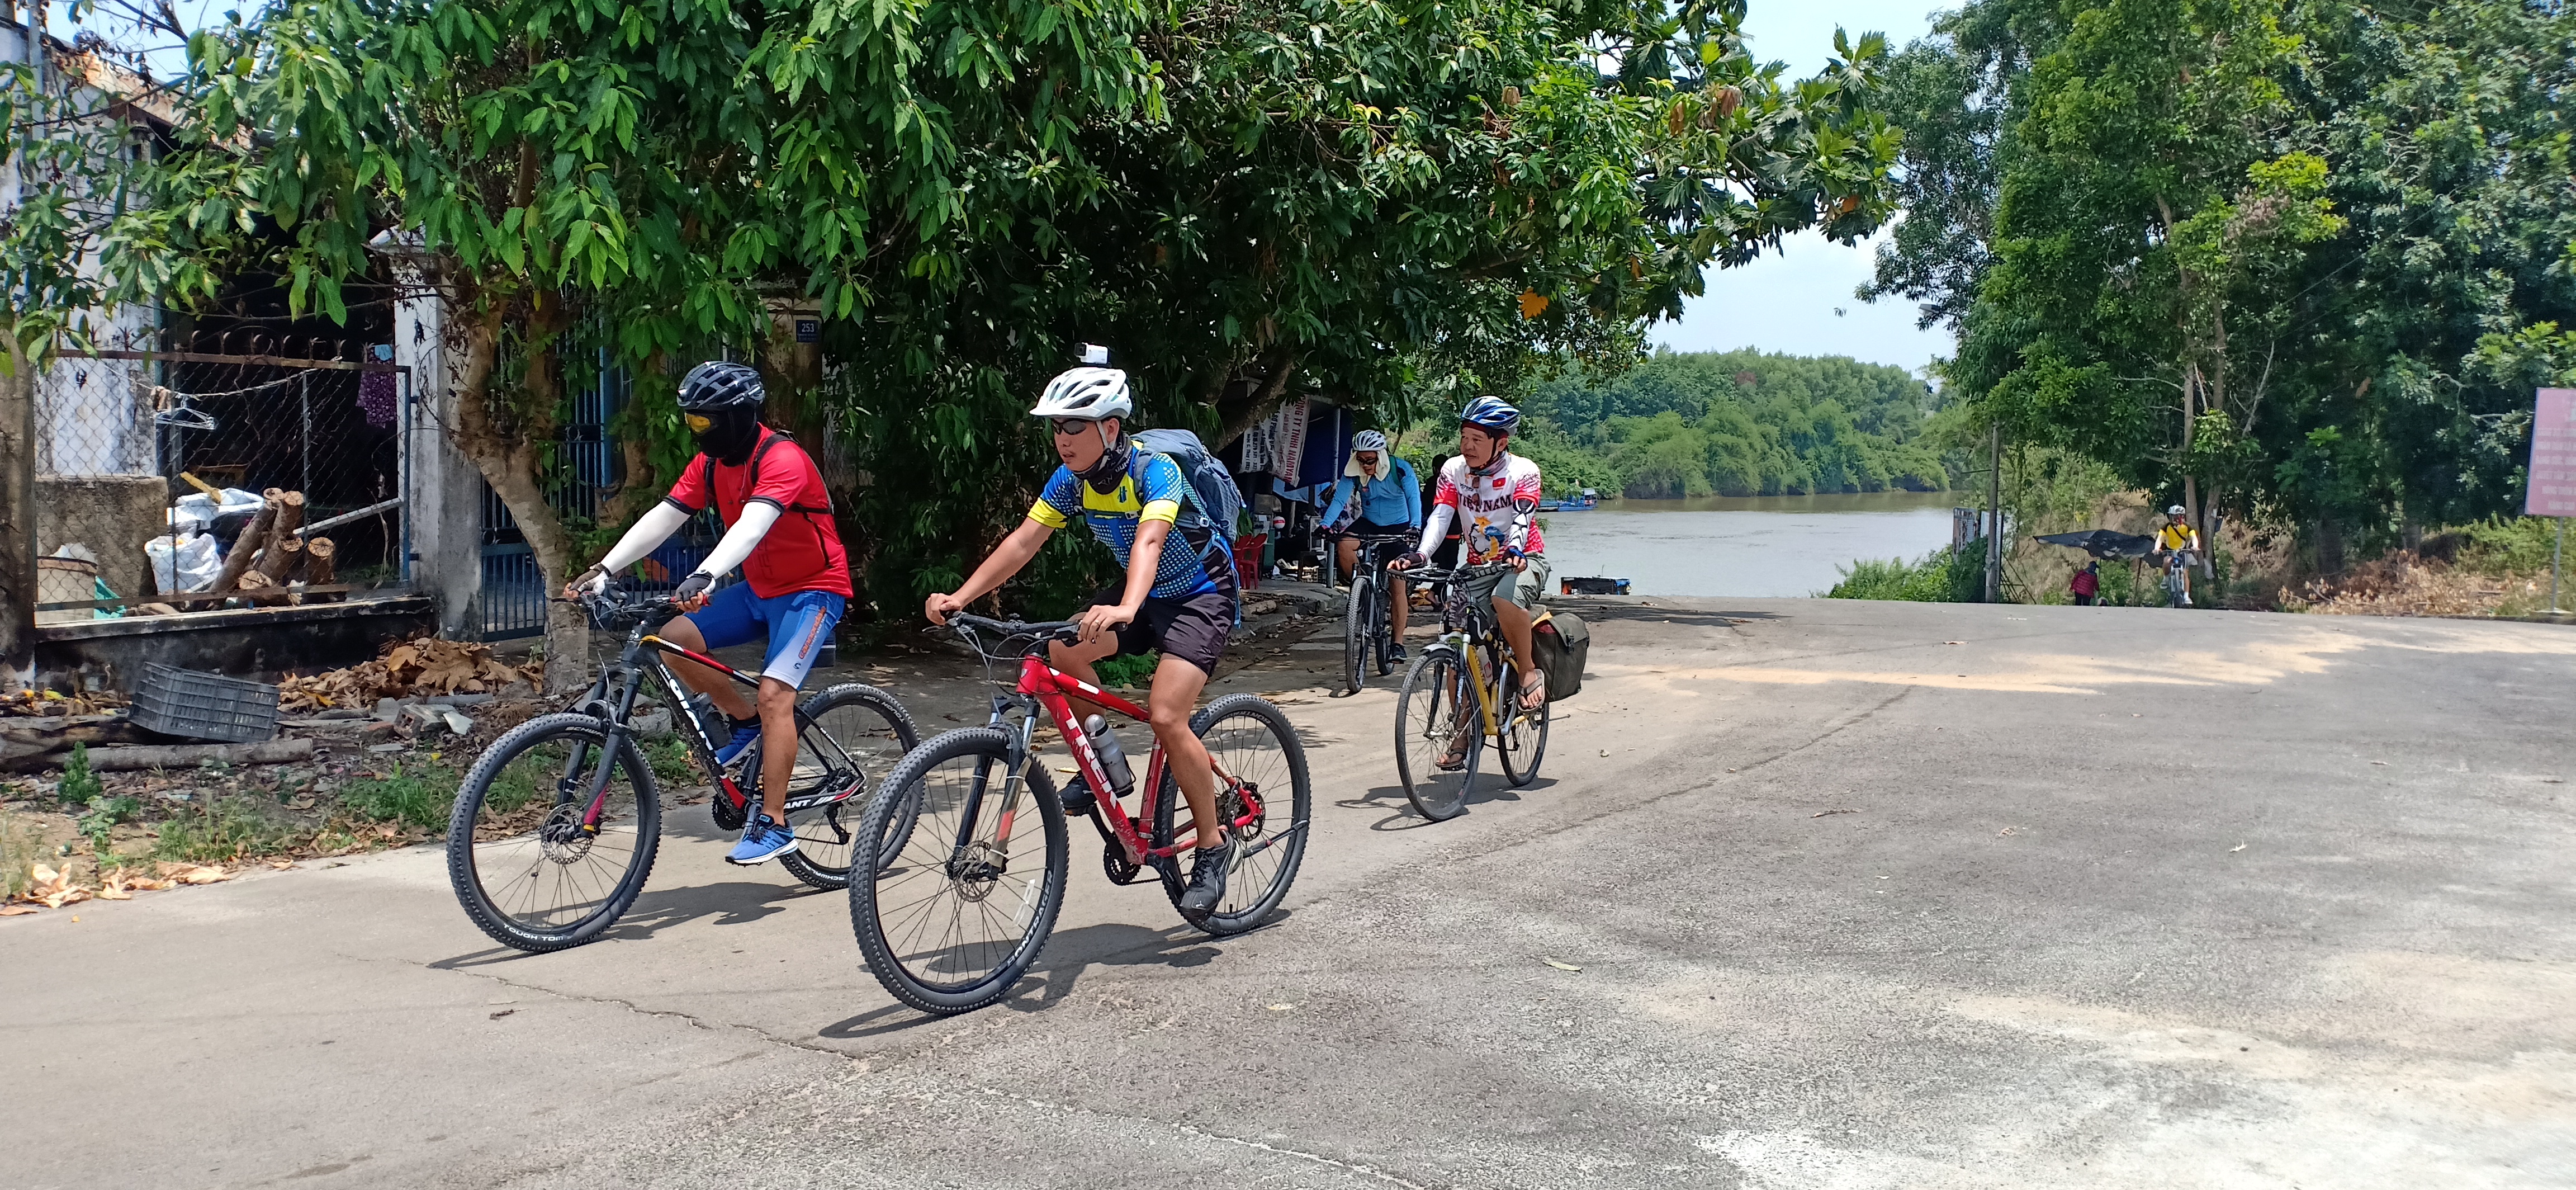 CYCLING TO EXPLORE THE LAKE & FOREST DAY TRIP